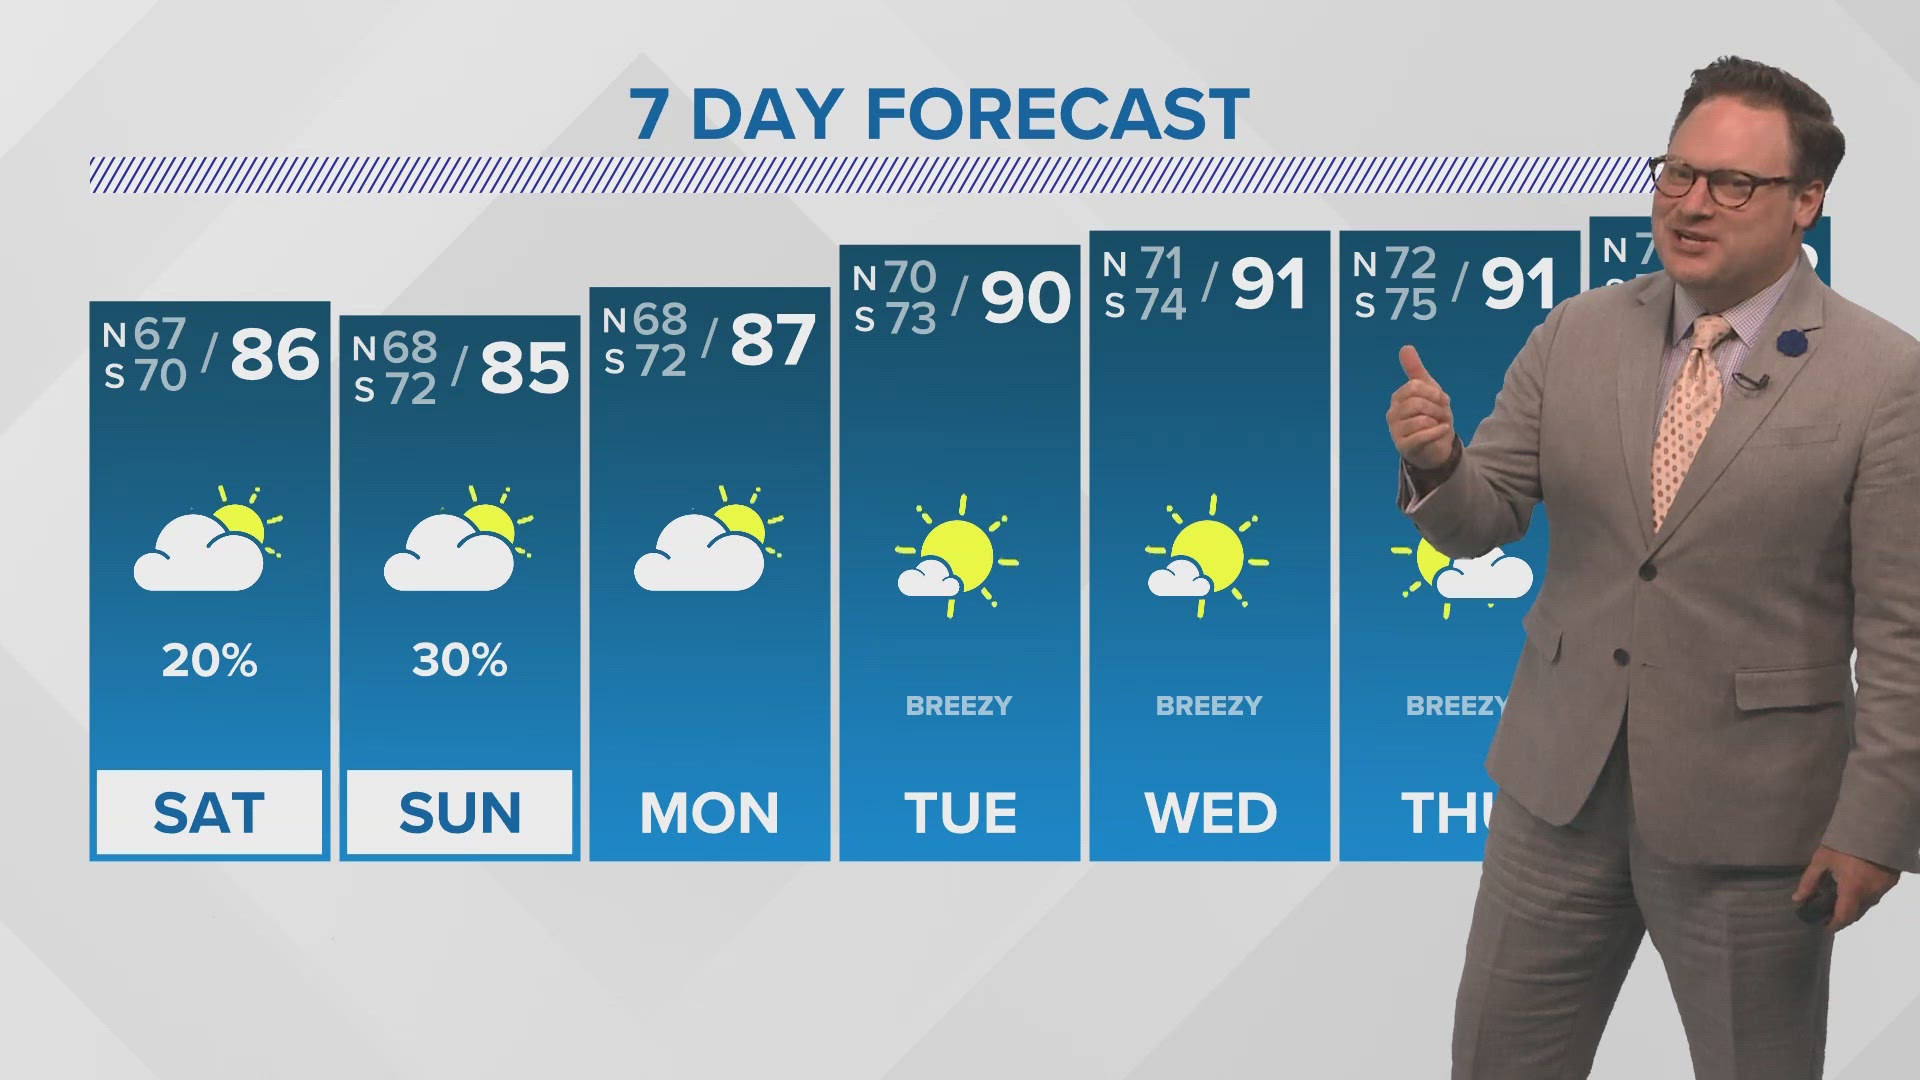 Chief Meteorologist Chris Franklin says Saturday and Sunday will be dry with chance for a few isolated showers. Next week temperatures go up to 90 degrees.